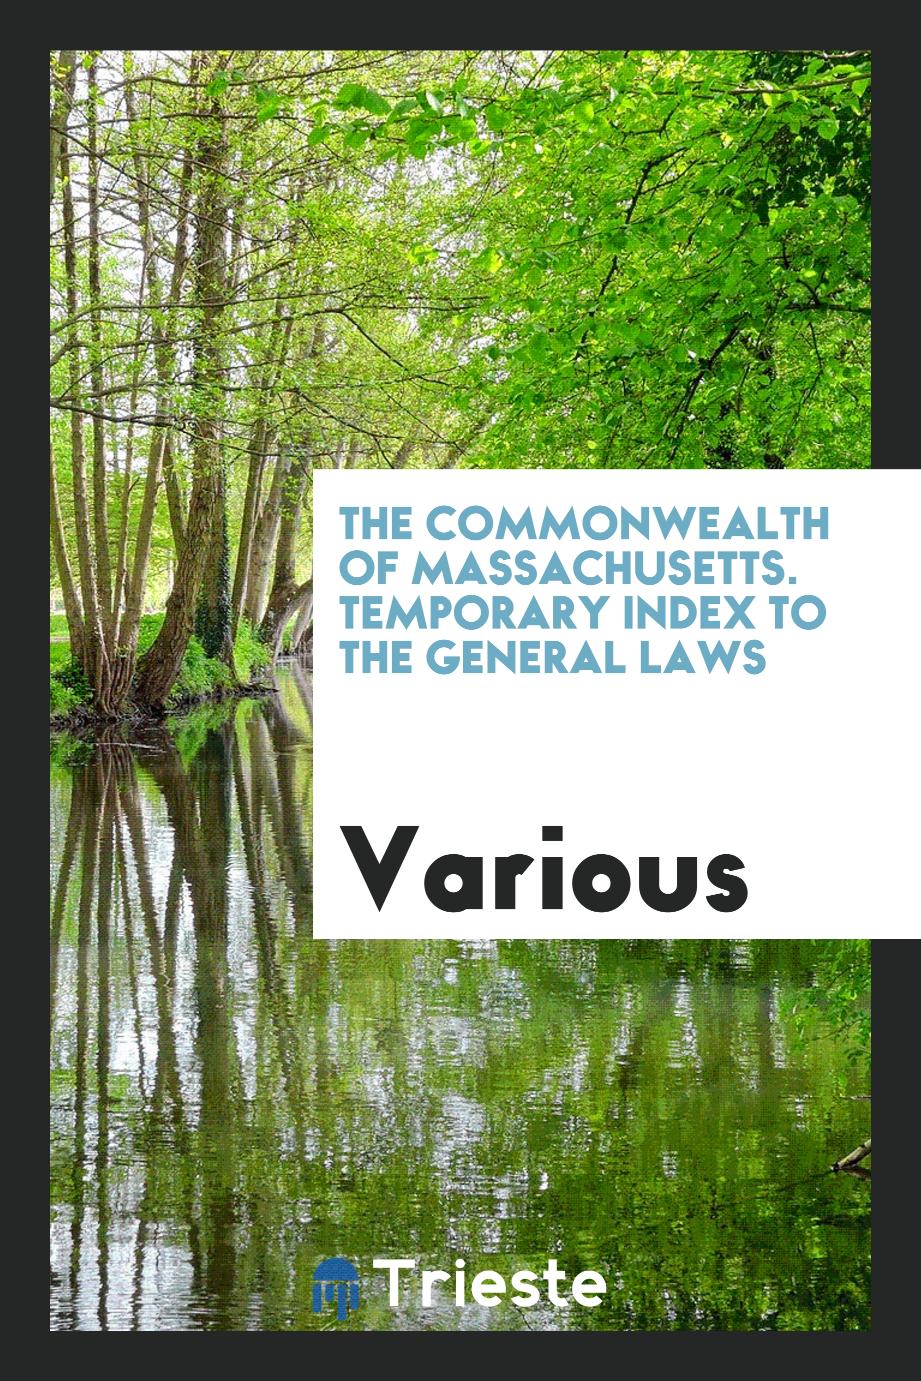 The Commonwealth of Massachusetts. Temporary index to the General Laws